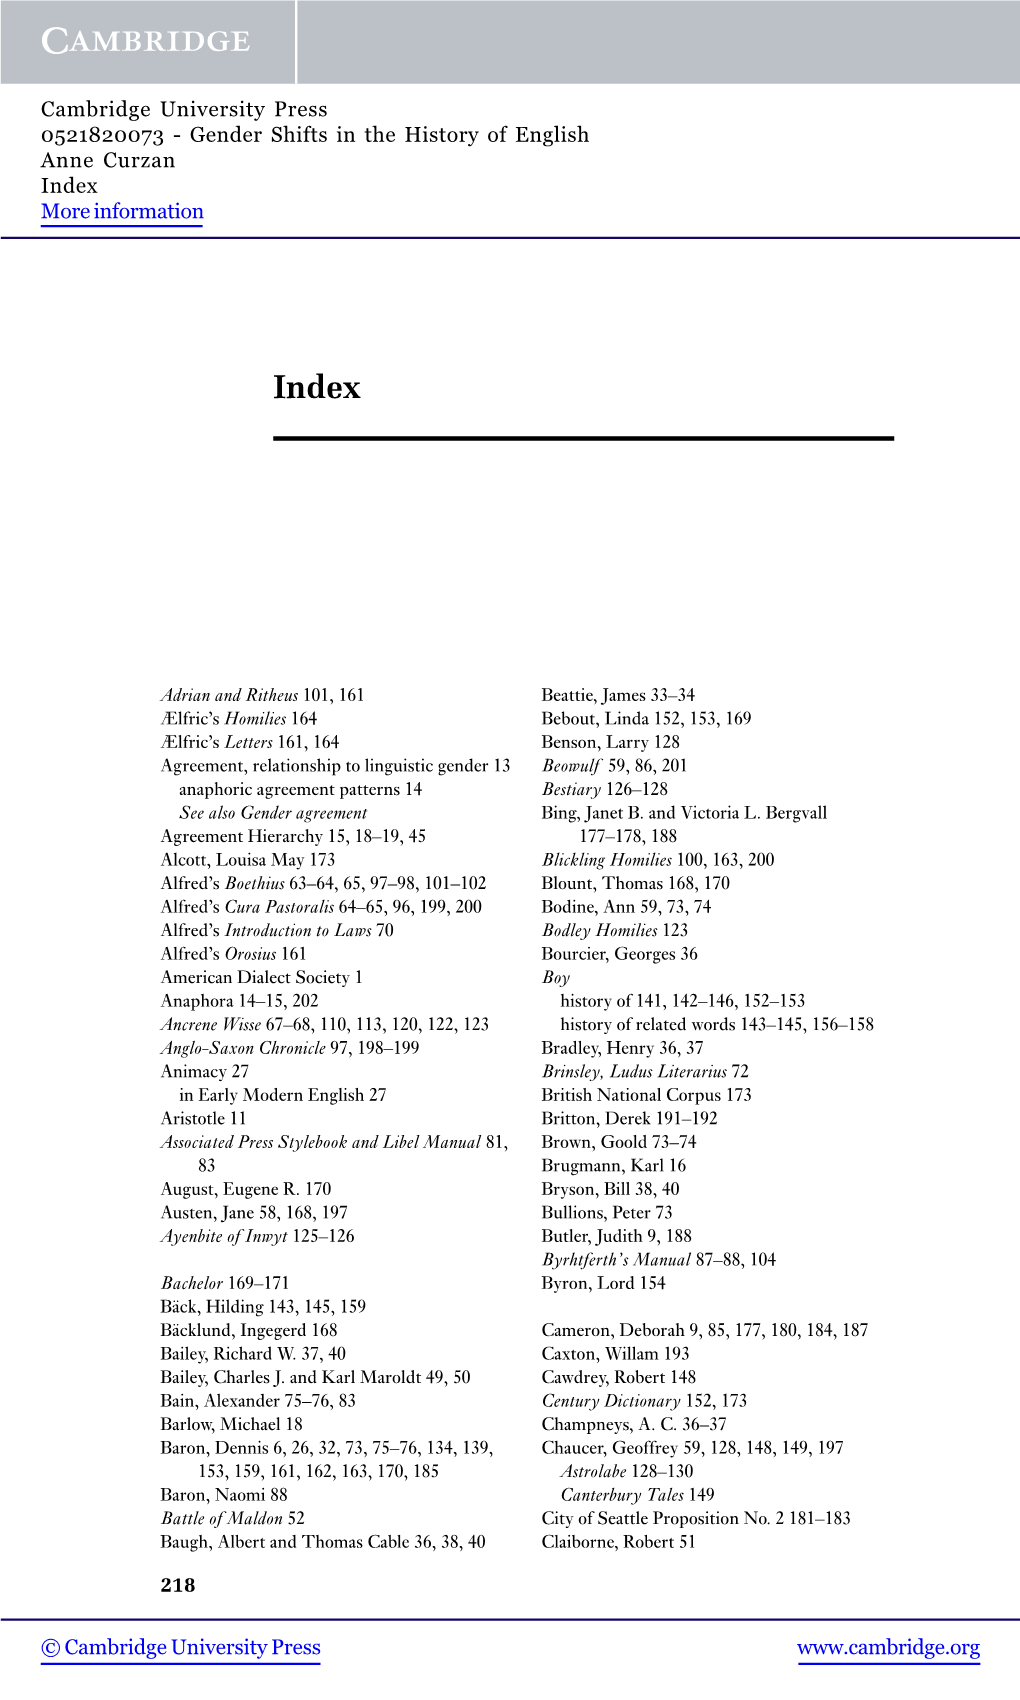 Gender Shifts in the History of English Anne Curzan Index More Information